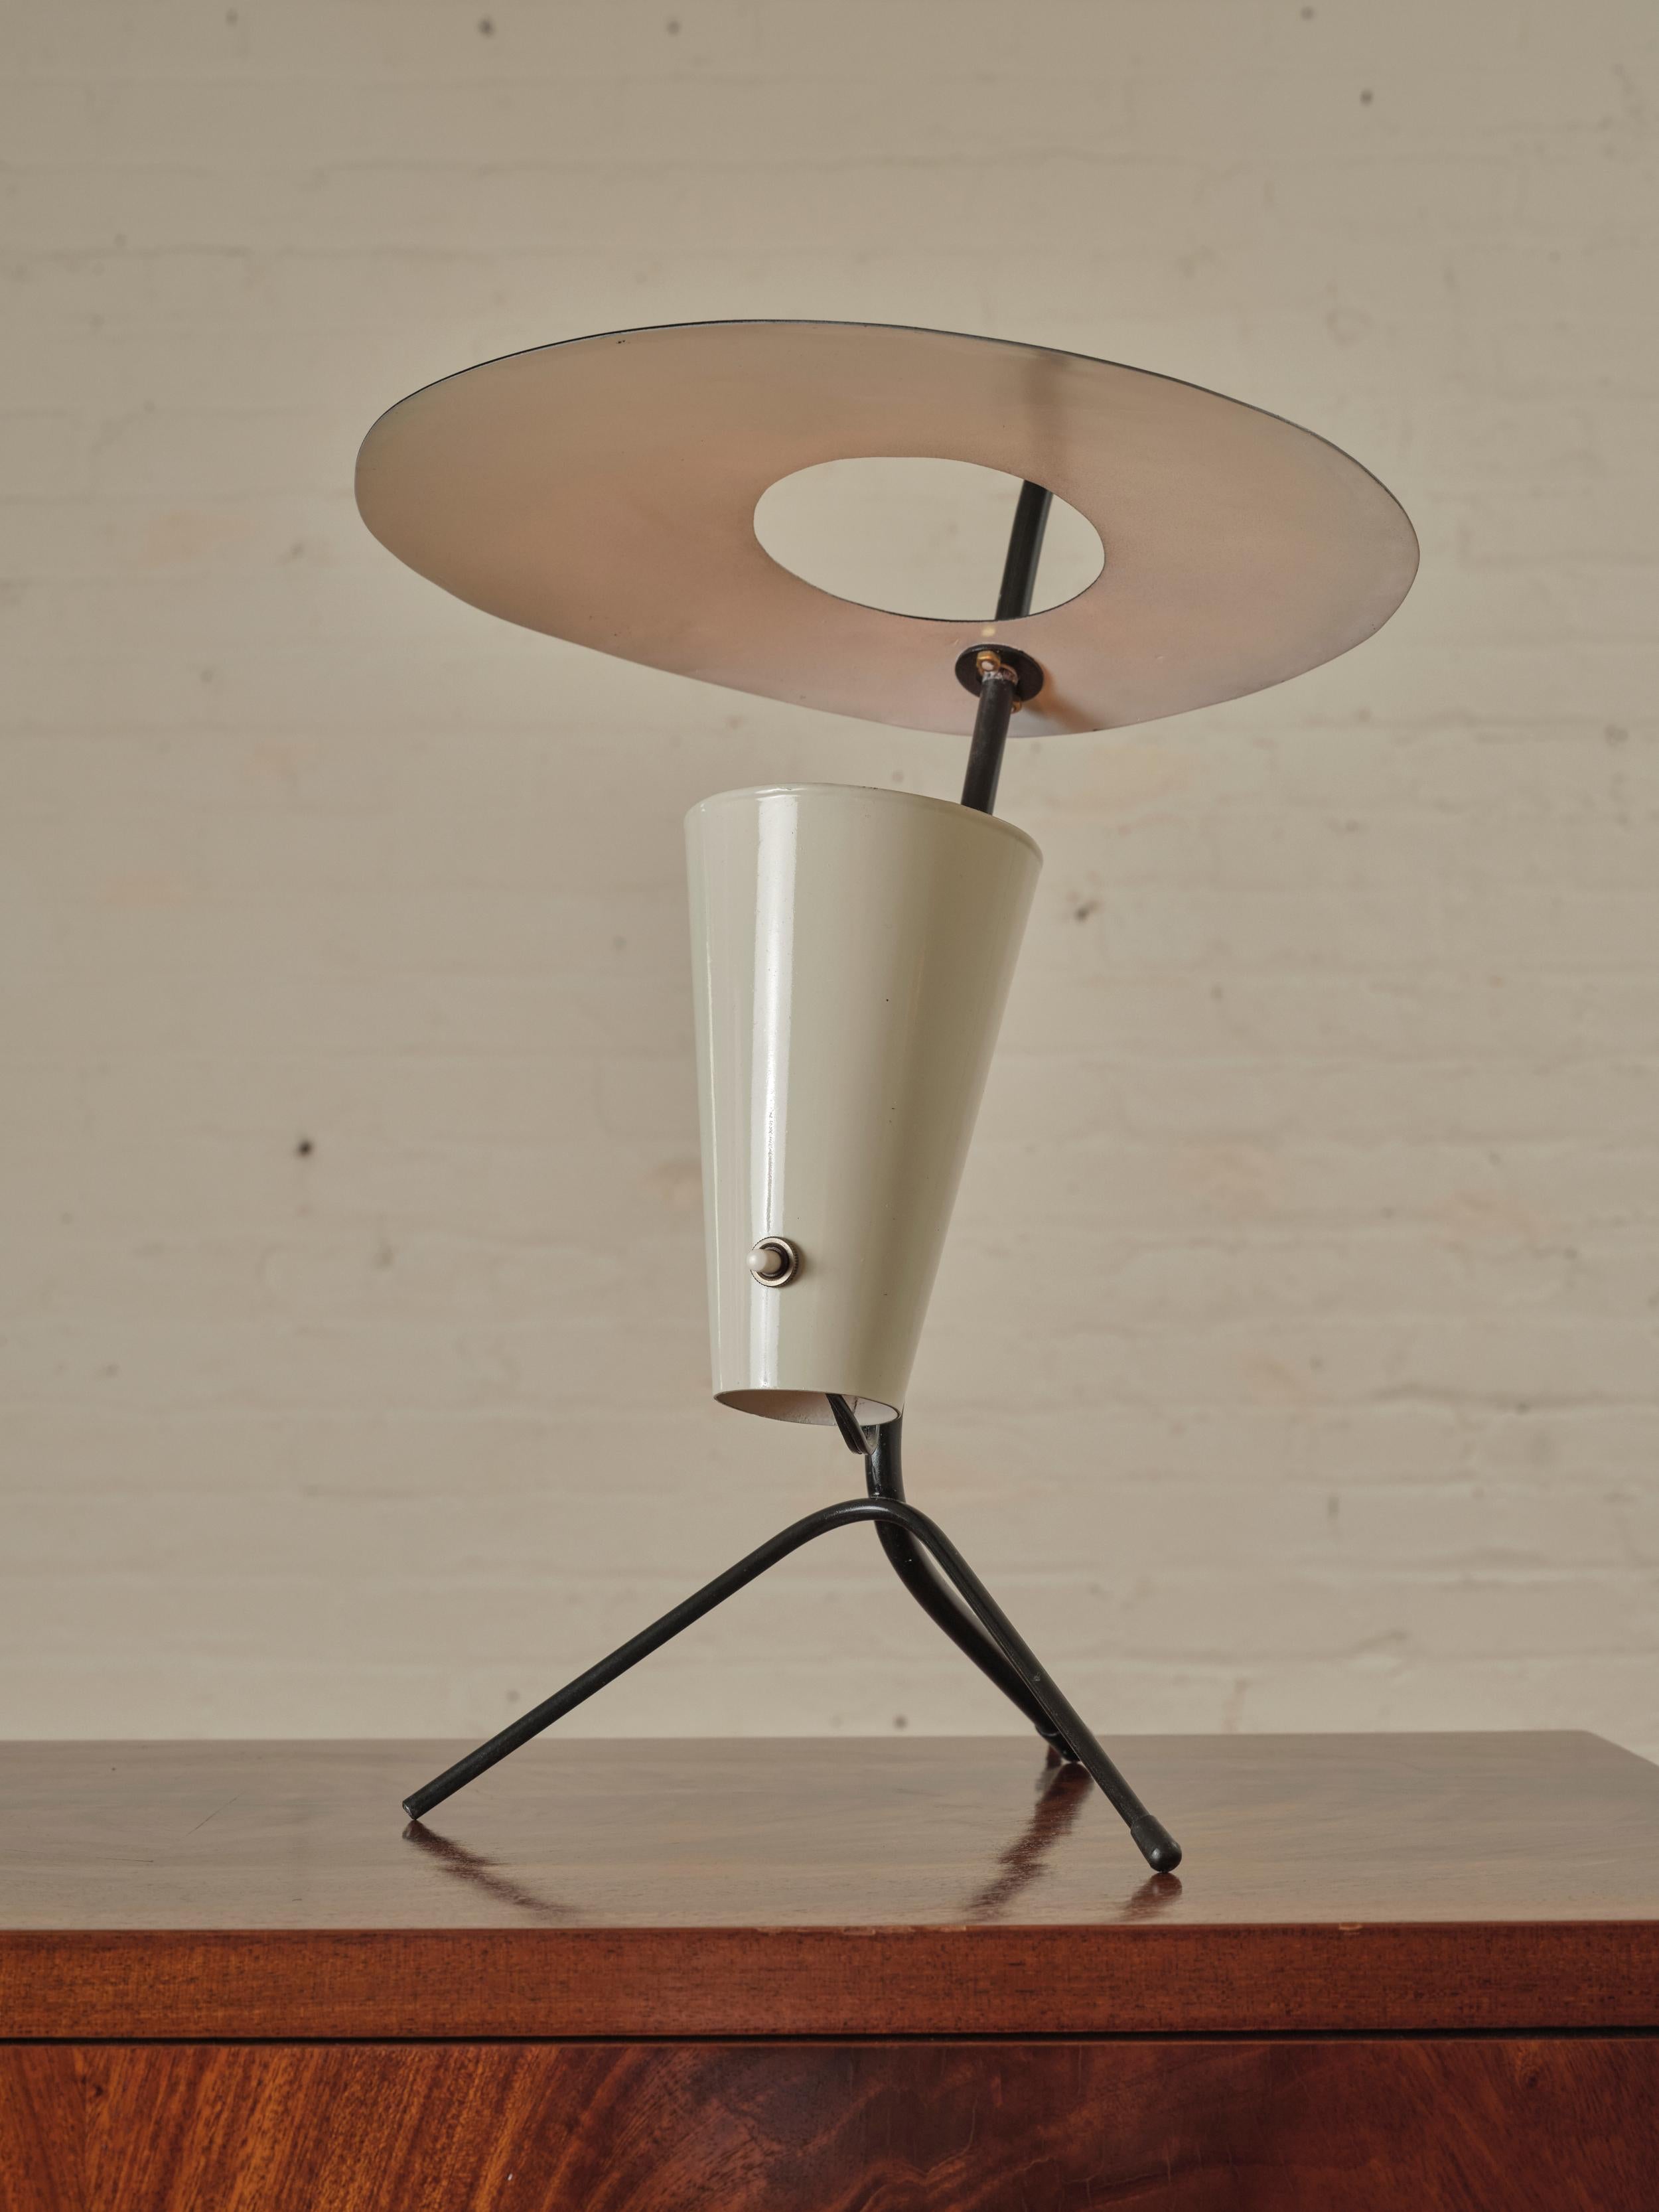 French Tripod Table Lamp, attributed to Pierre Guariche. The lamp is crowned by a chic enameled metal disc shade supported by a tripod base, adding stability and a sculptural element to its design